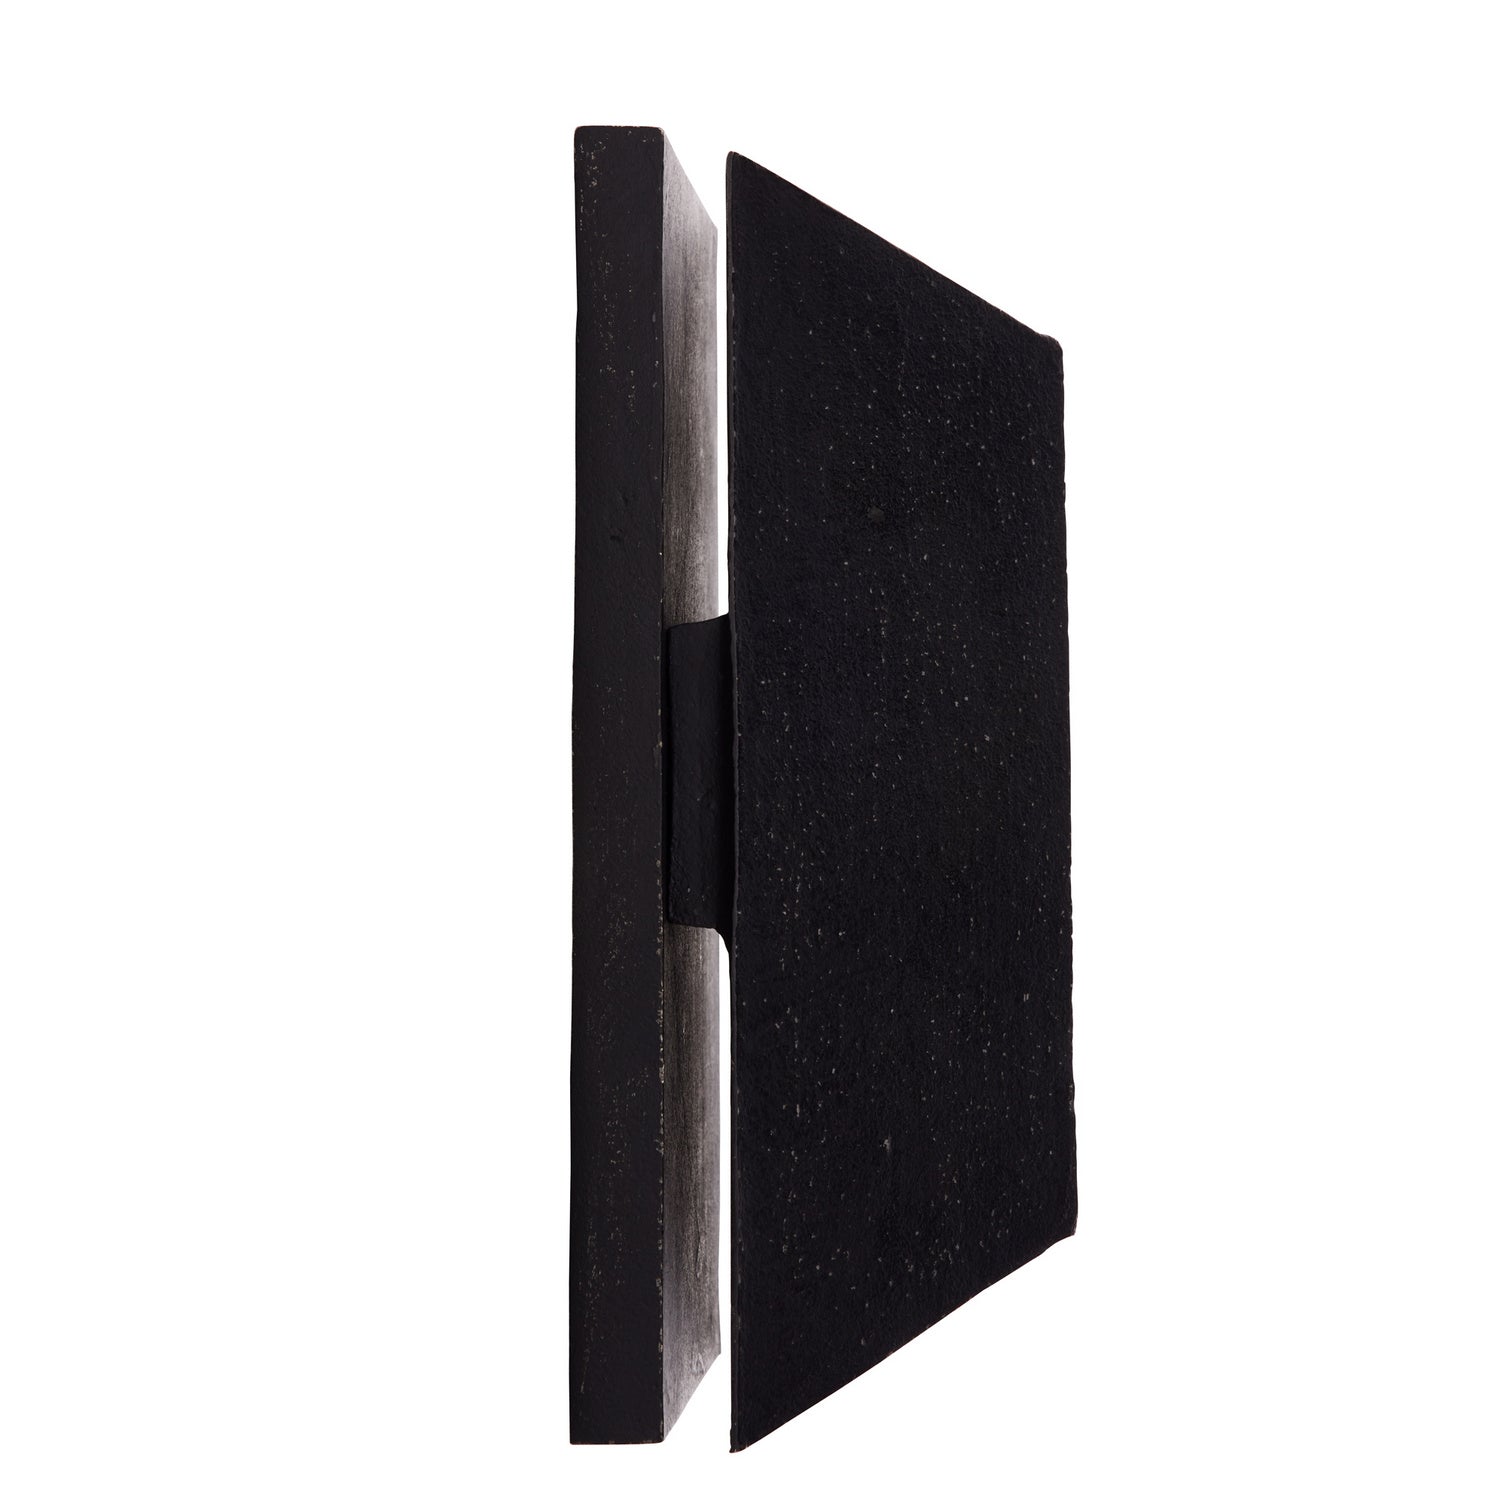 One Light Wall Sconce from the Orrick collection in Matte Charcoal finish